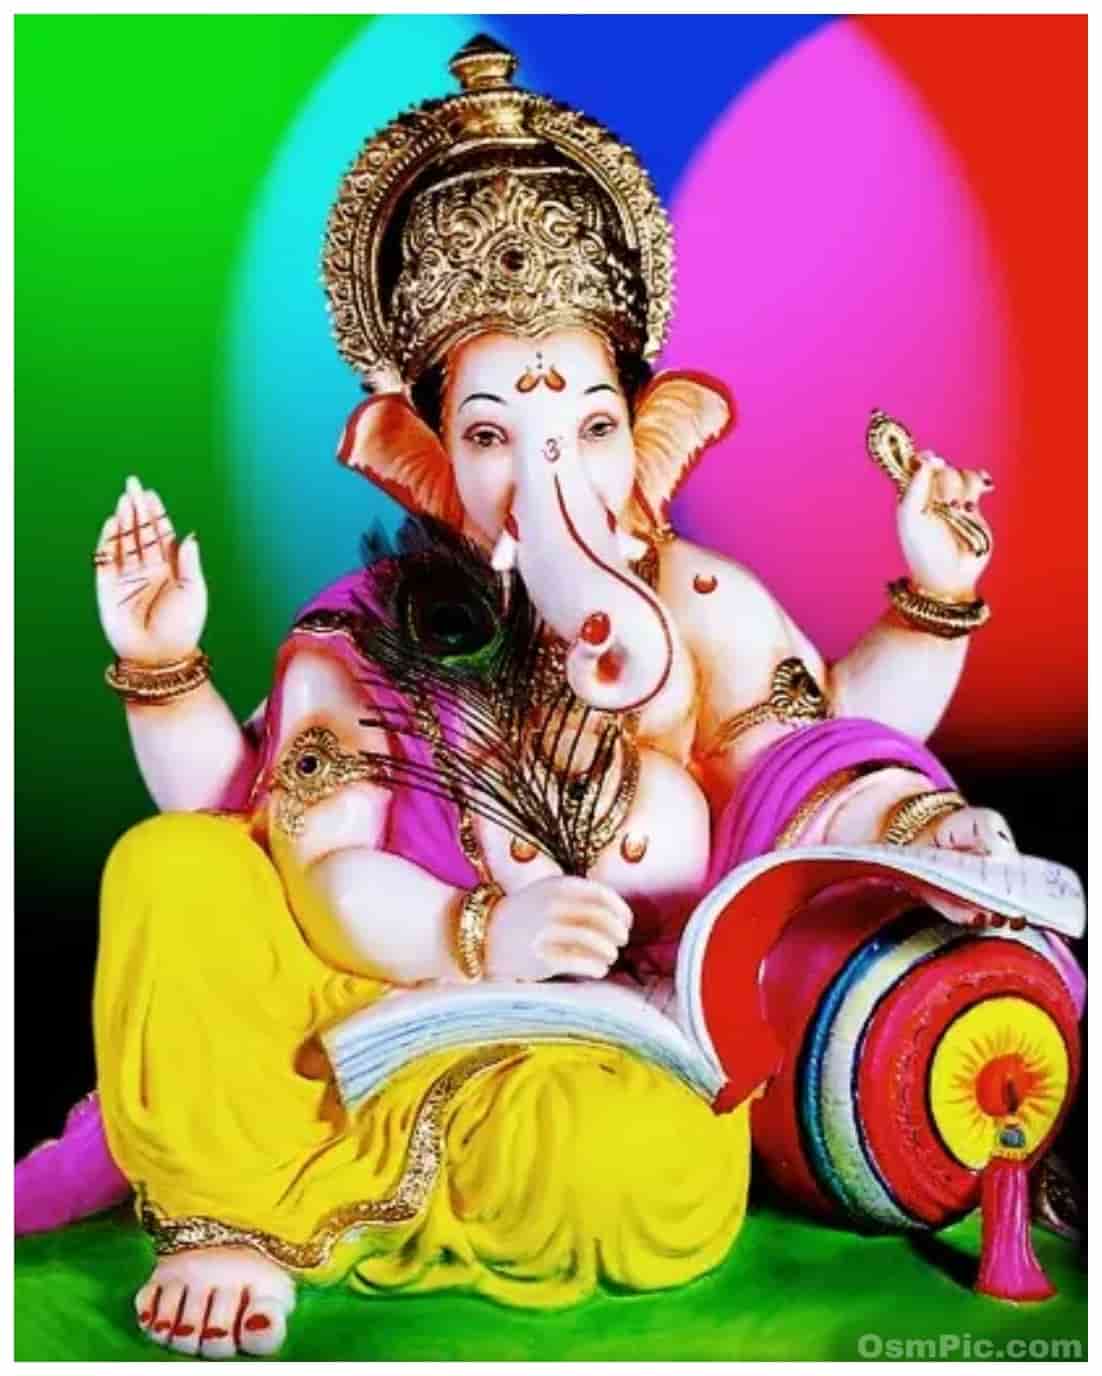 Top 51 Ganesh Wallpaper Hd Ganpati Images For Whatsapp Dp Pic Mobile As we all know whatsapp dp is getting popular around the globe. ganesh wallpaper hd ganpati images